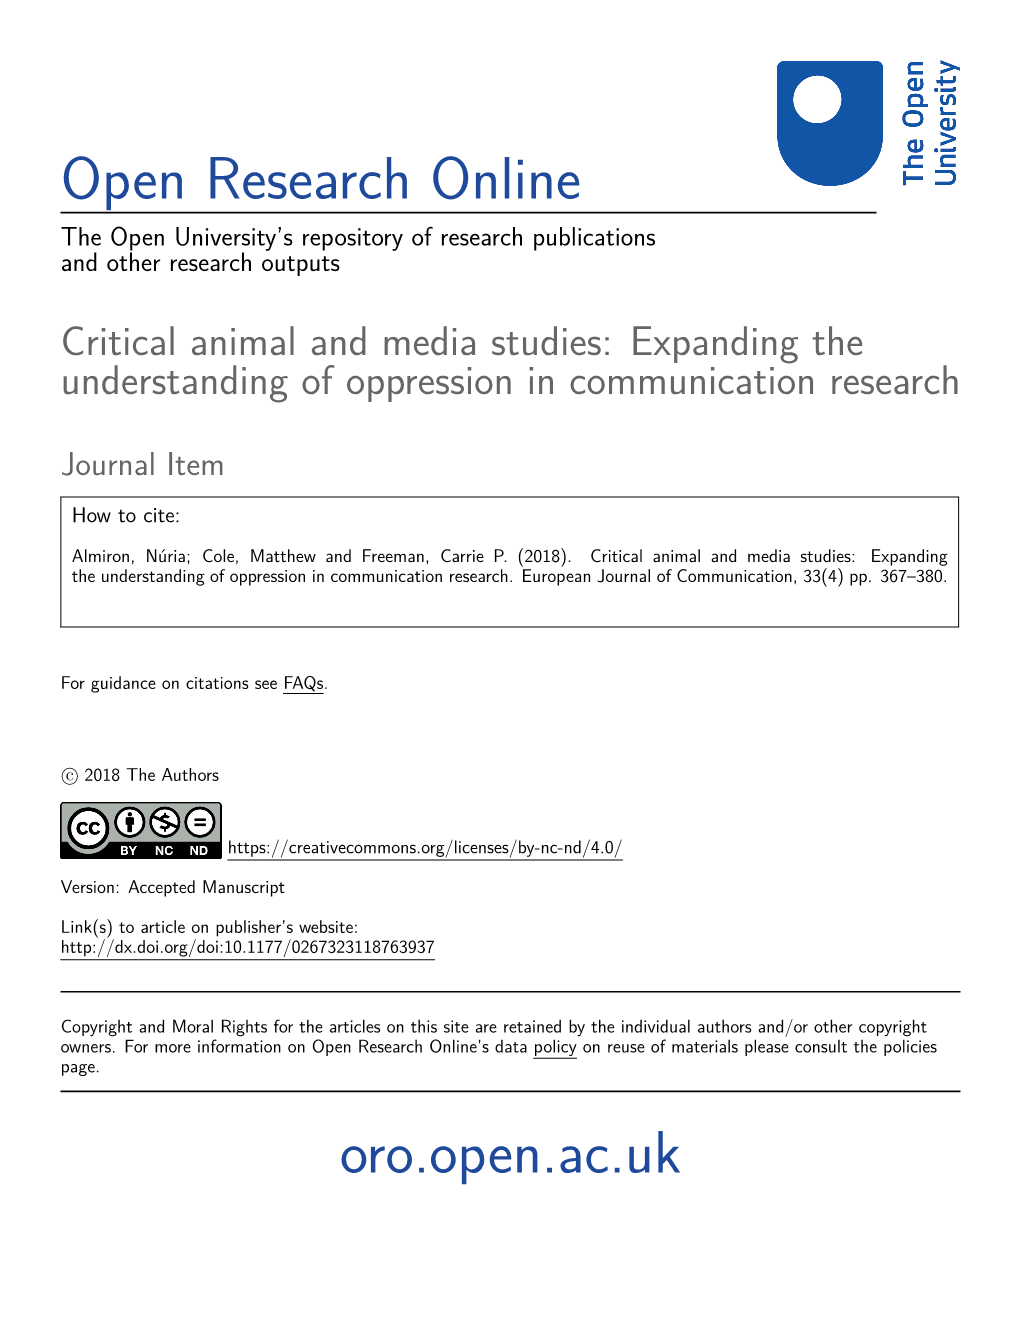 Critical Animal and Media Studies: Expanding the Understanding of Oppression in Communication Research